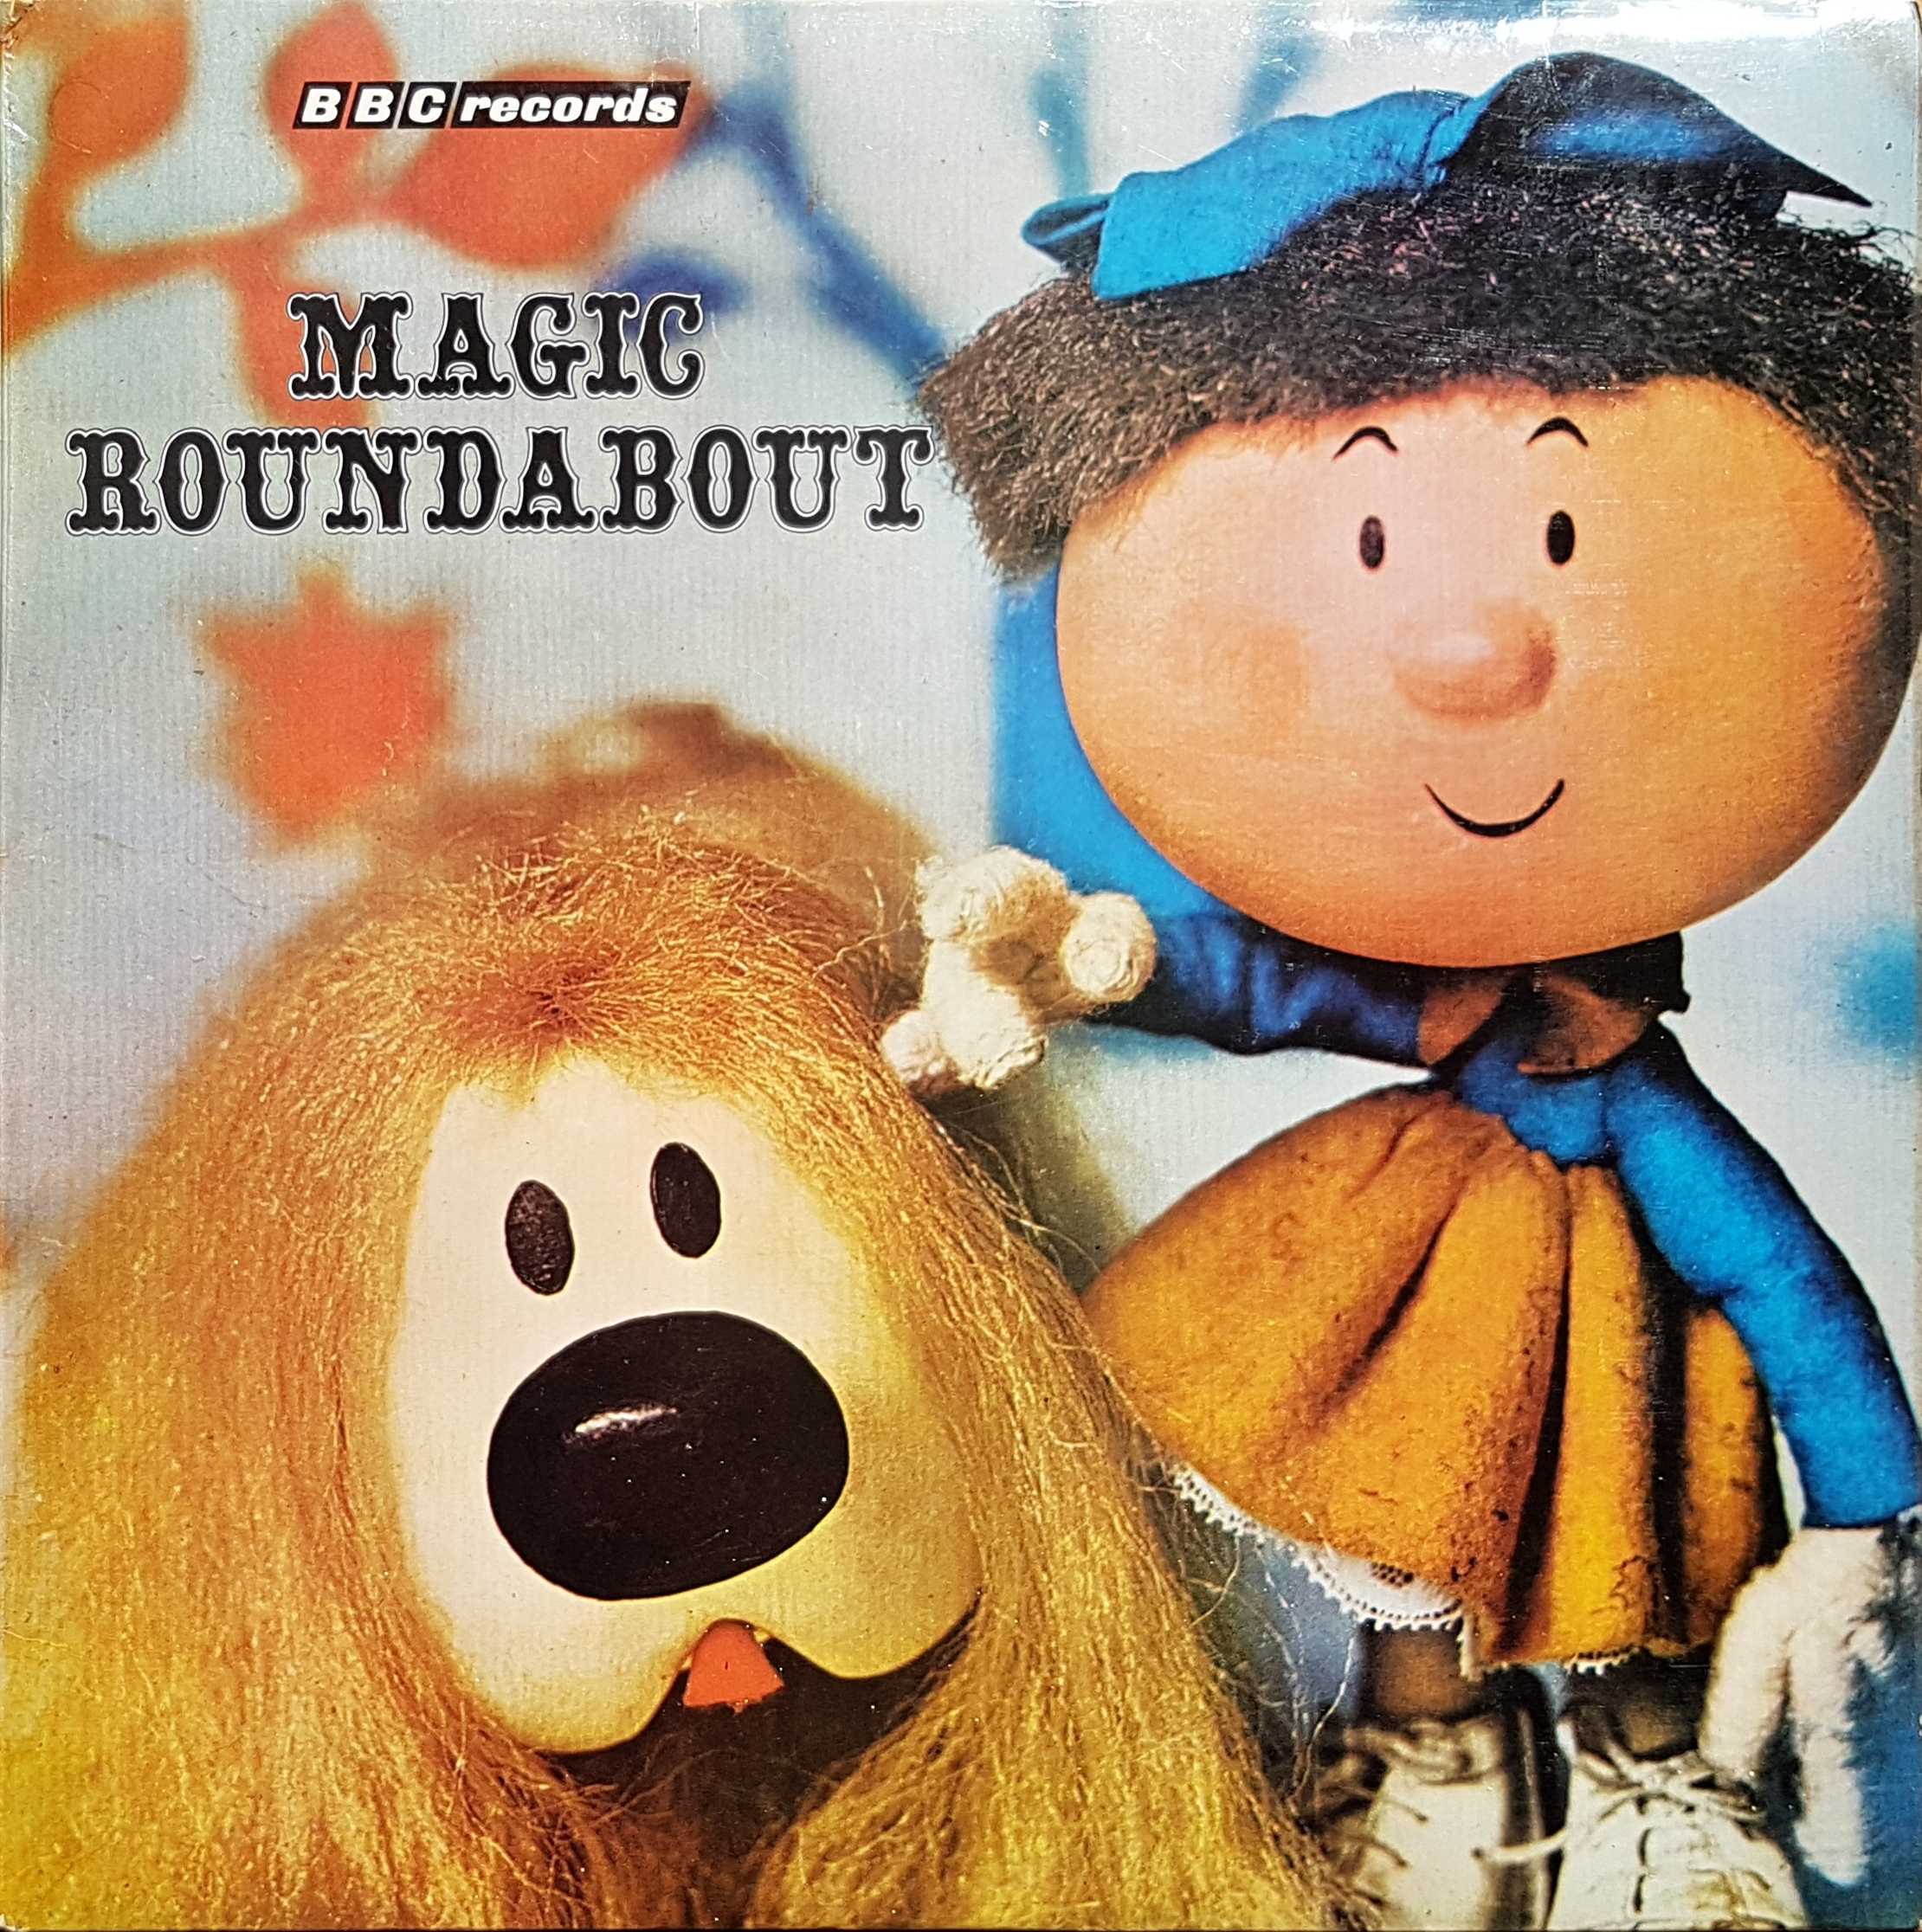 Picture of The magic roundabout by artist Eric Thompson from the BBC albums - Records and Tapes library